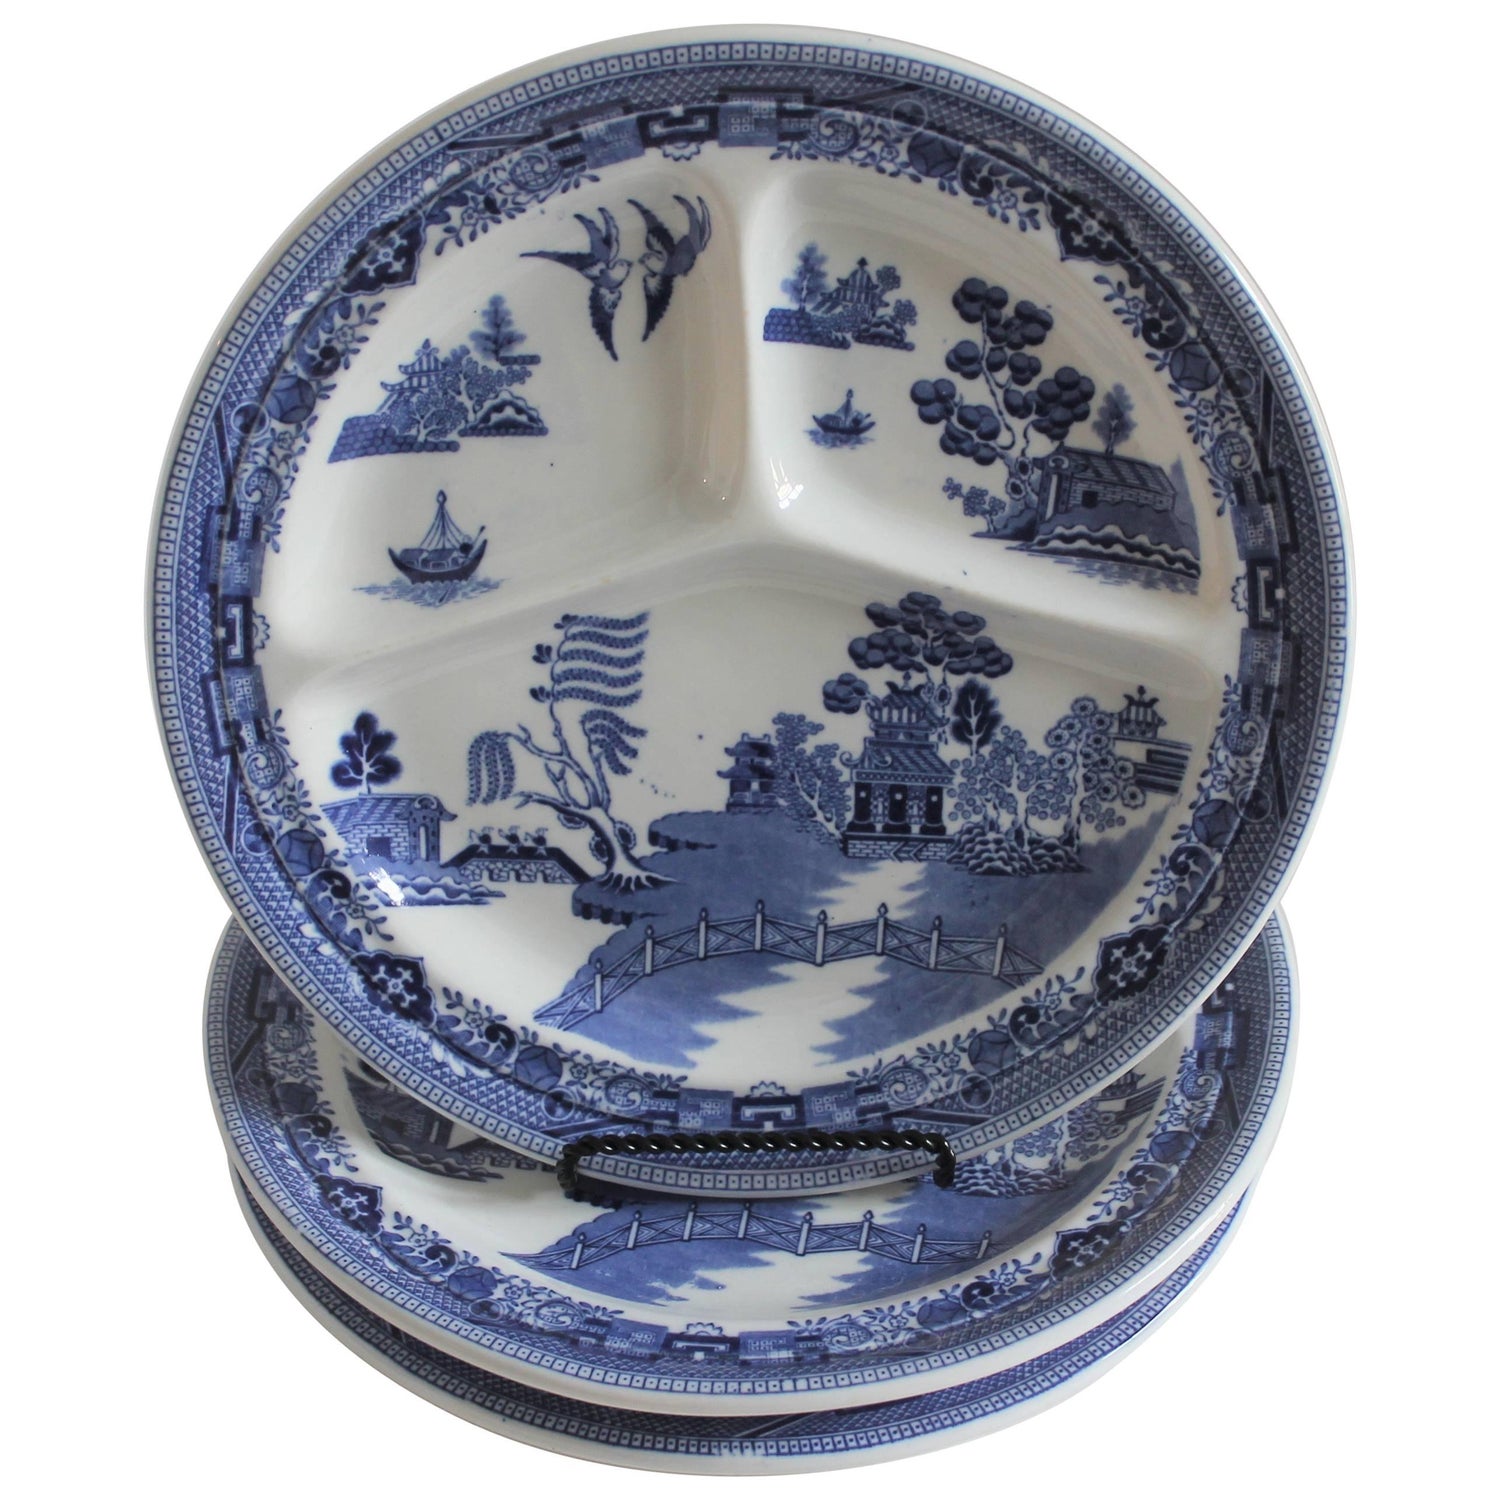 Blue Willow Dinner Plates, Ironstone - Pair – The House of Hanbury